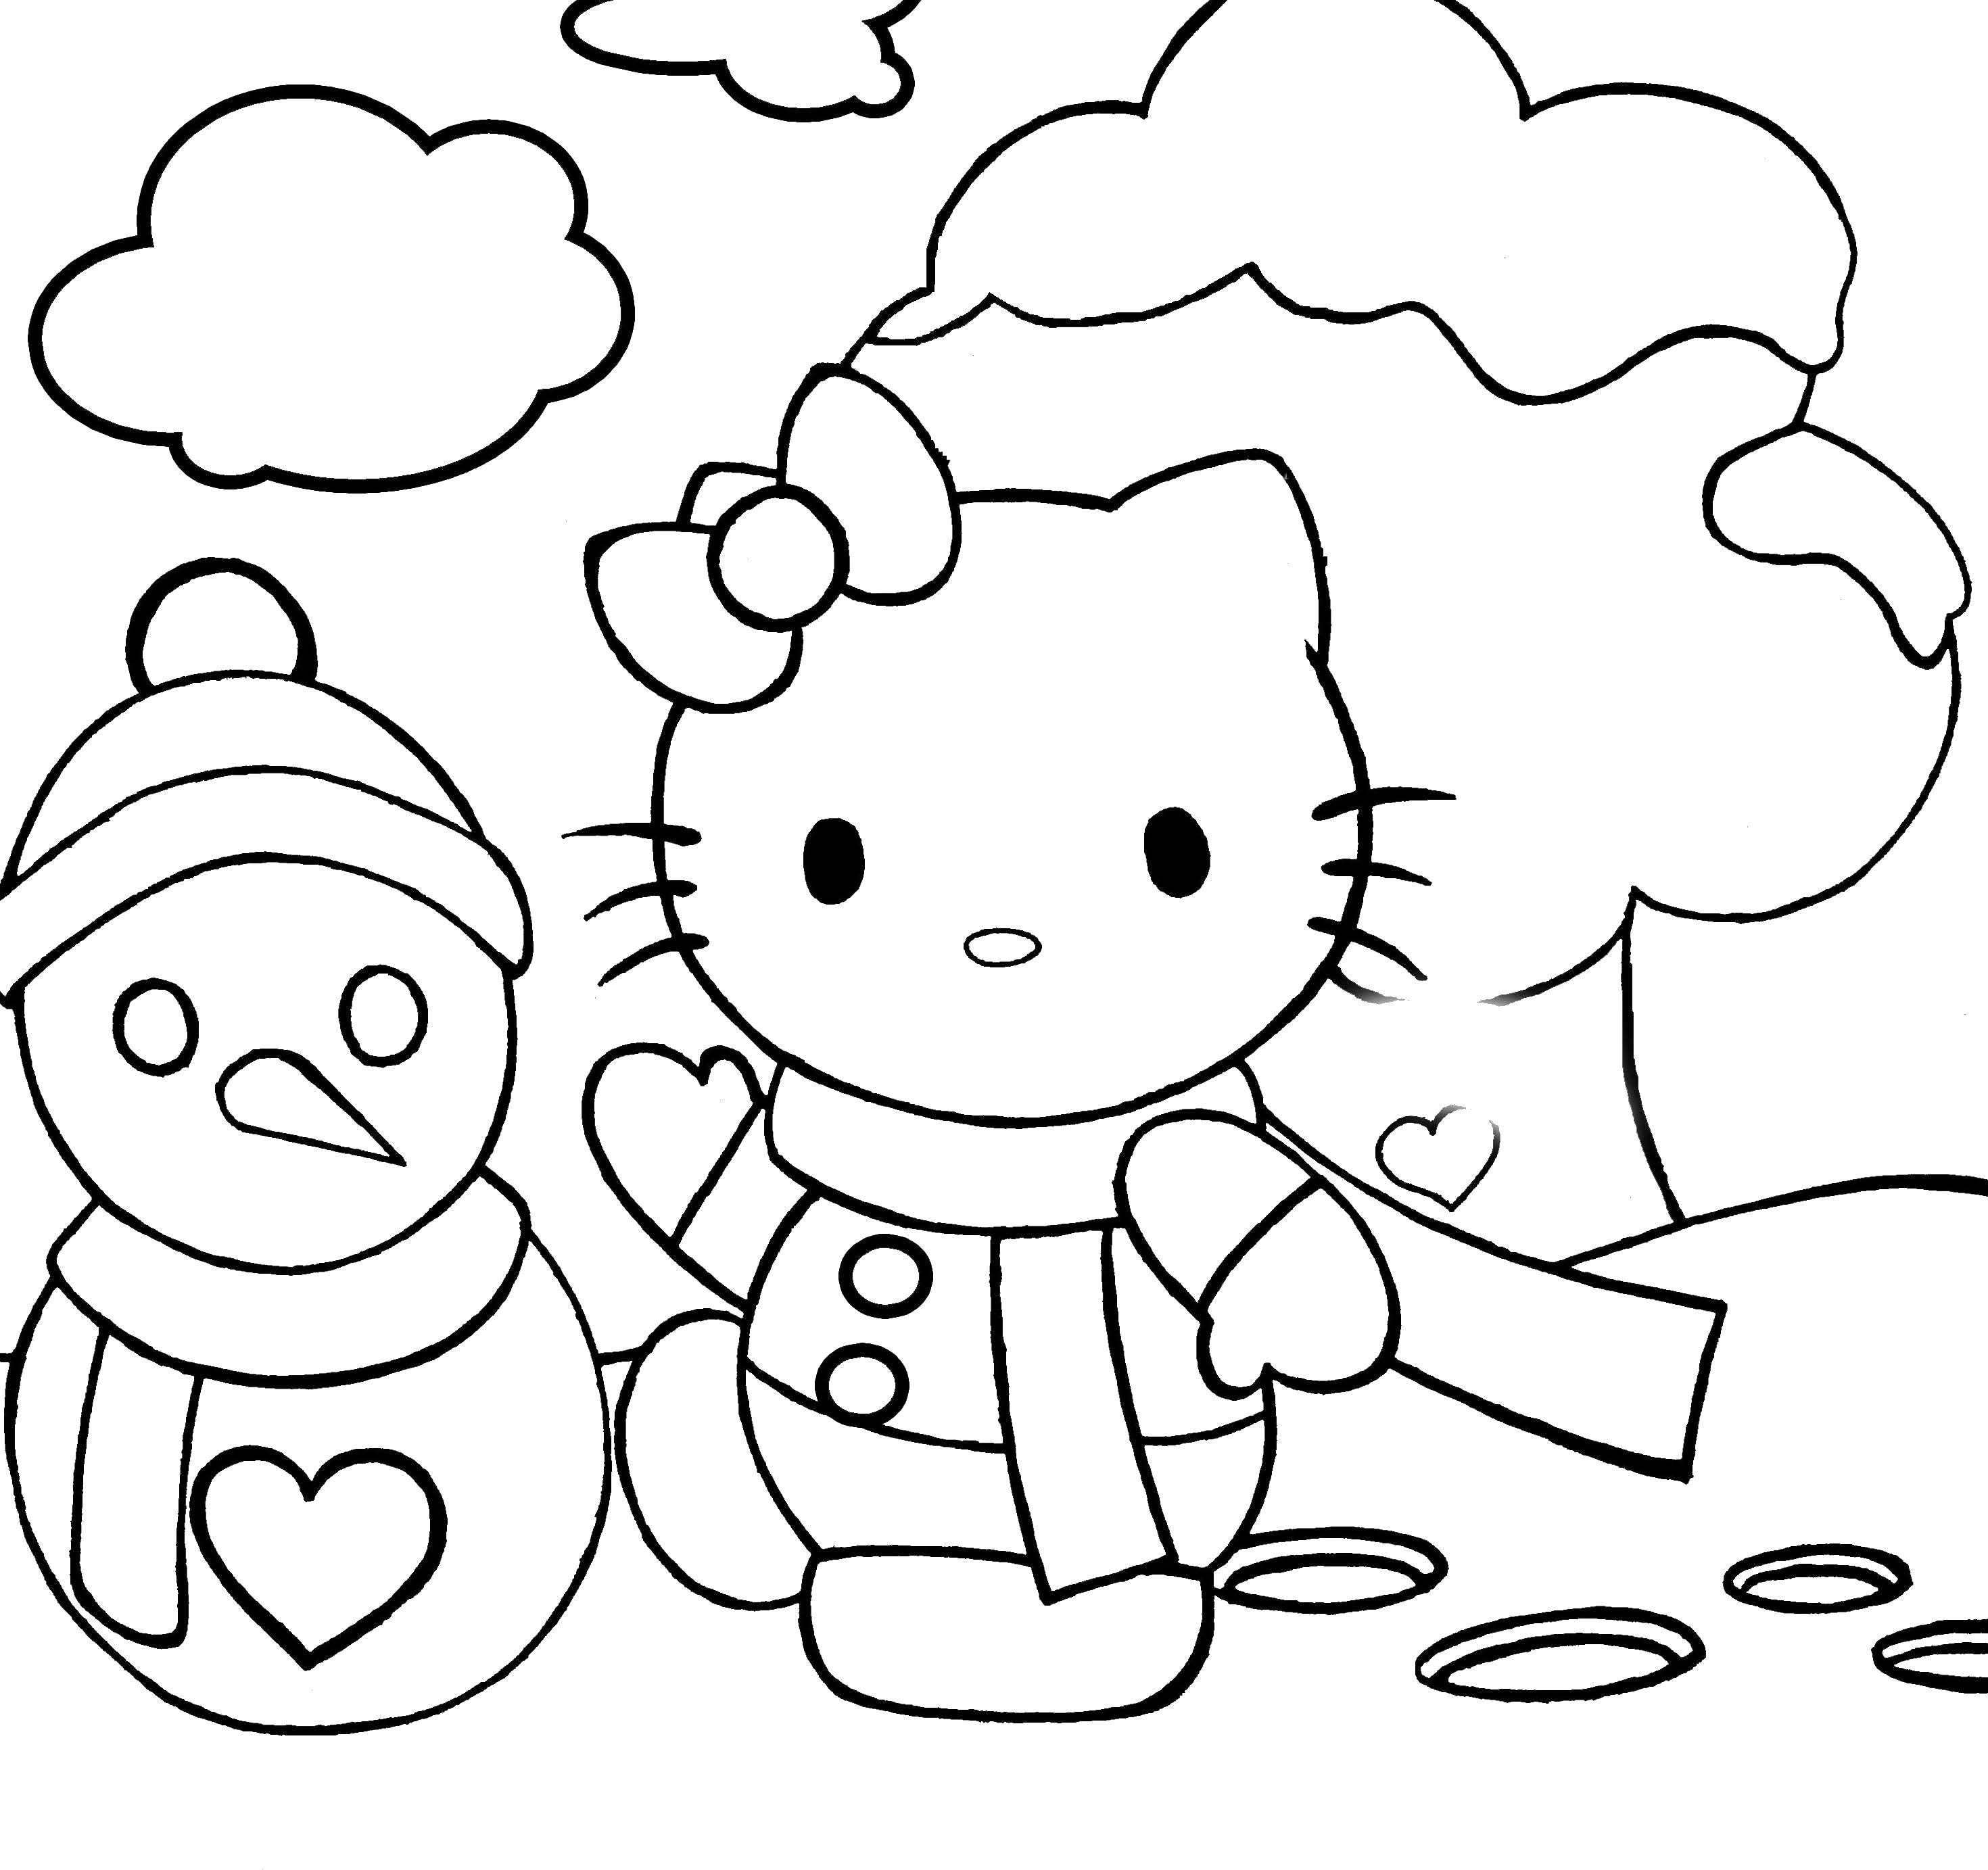 Coloring Hello kitty and snowman. Category Hello Kitty. Tags:  Hello kitty, snowman, cartoon.